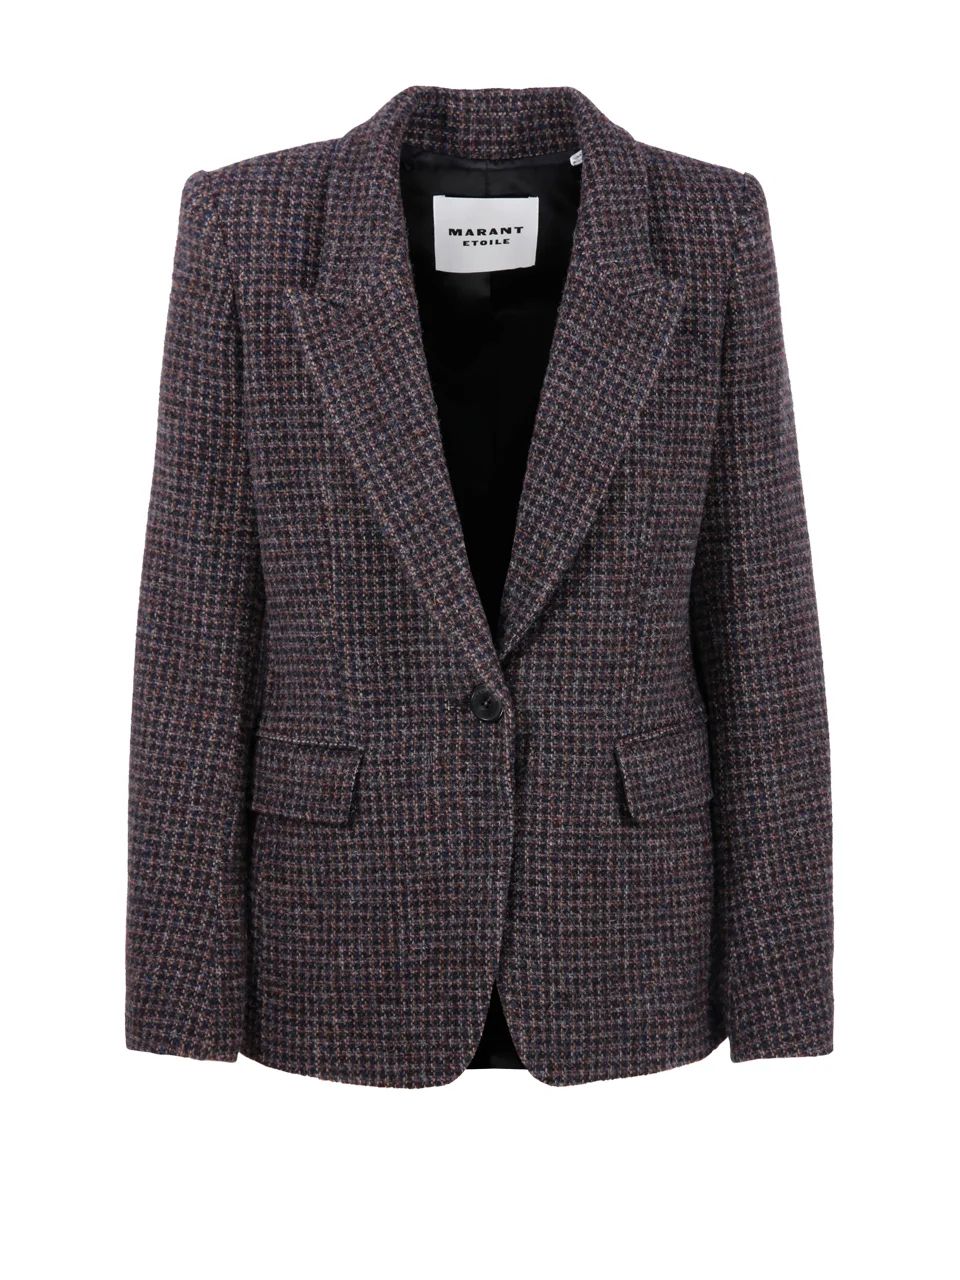 Isabel Marant Étoile All-Over Patterned Single-Breasted Blazer | Cettire Global